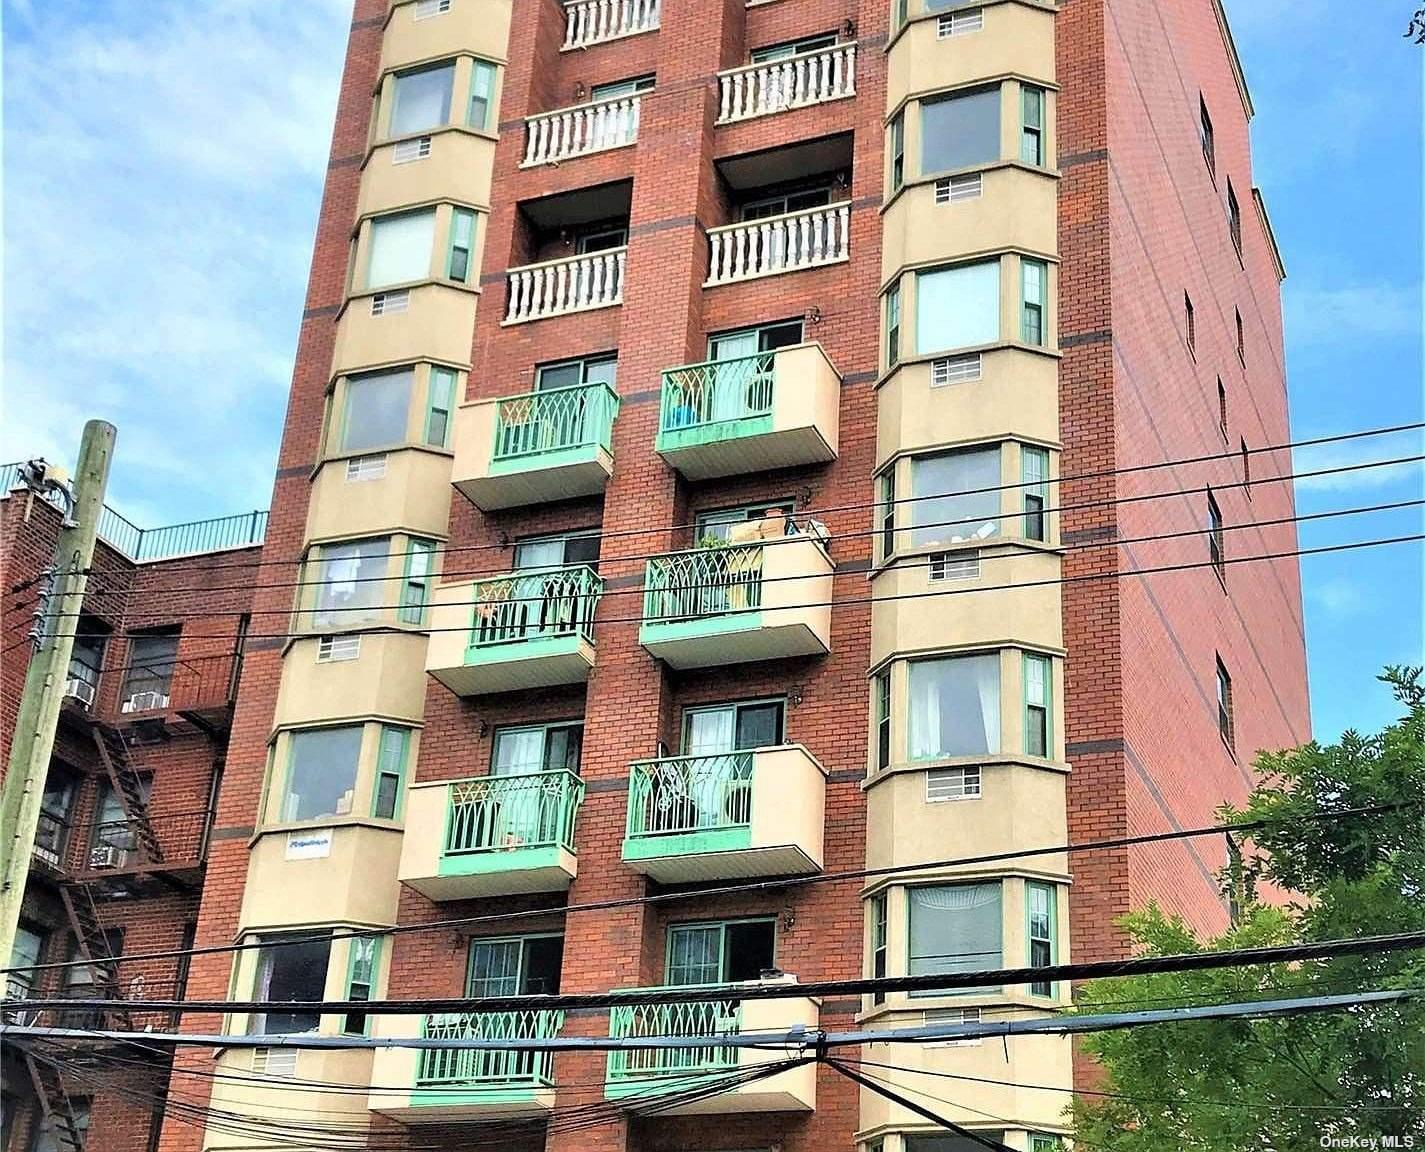 134-43 Maple Avenue #2B in Queens, Flushing, NY 11355